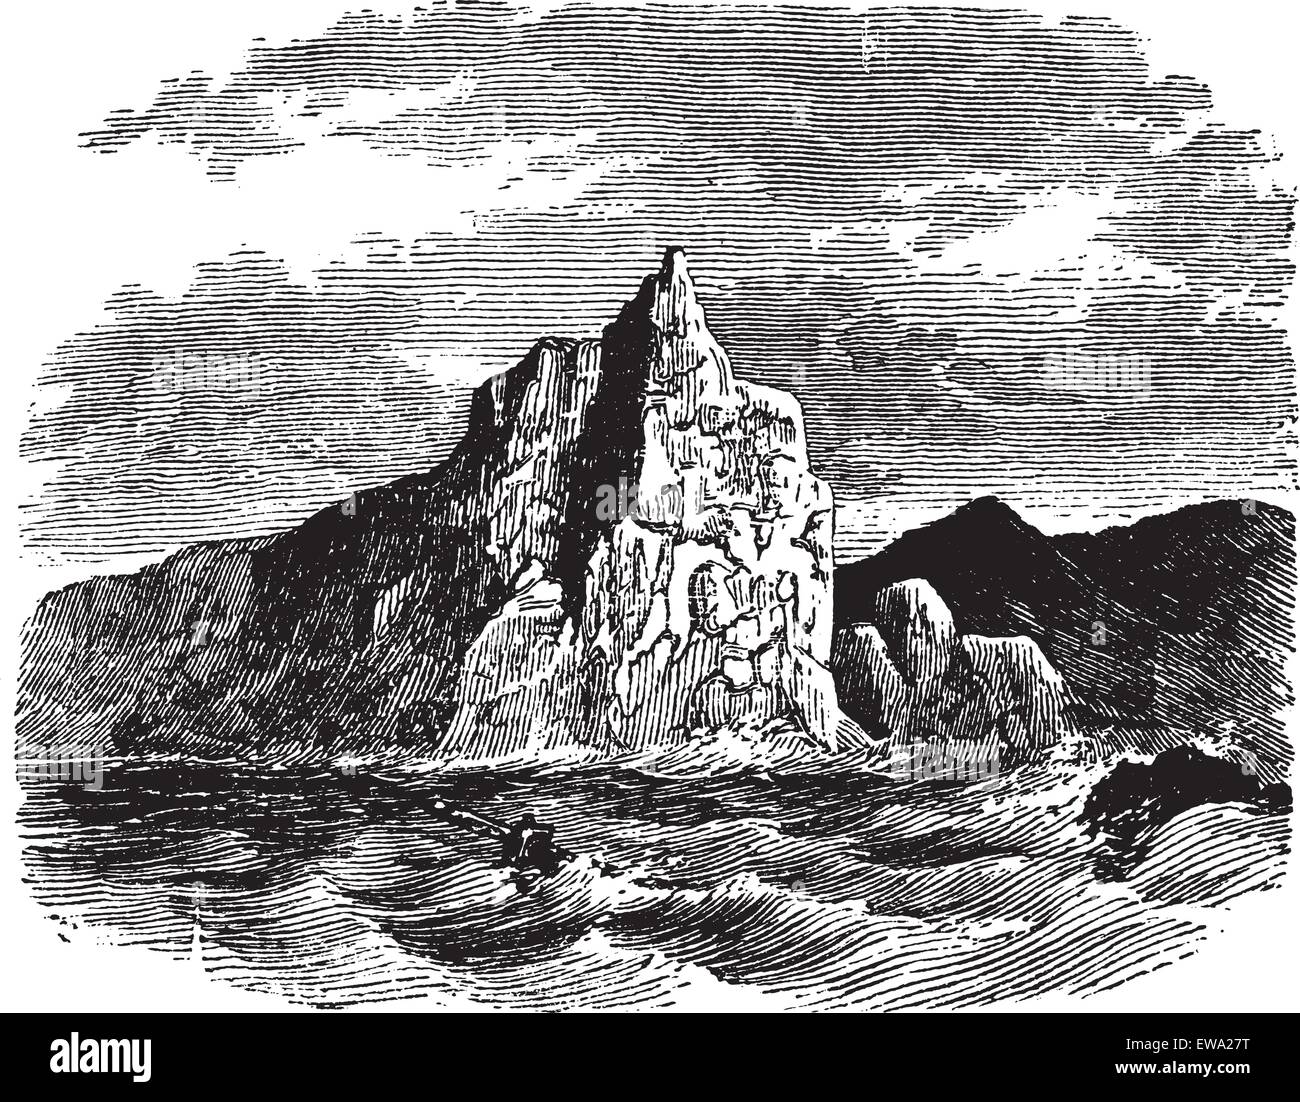 Cape Horn in Chile, during the 1890s, vintage engraving. Old engraved illustration of Cape Horn with running water in front. Stock Vector